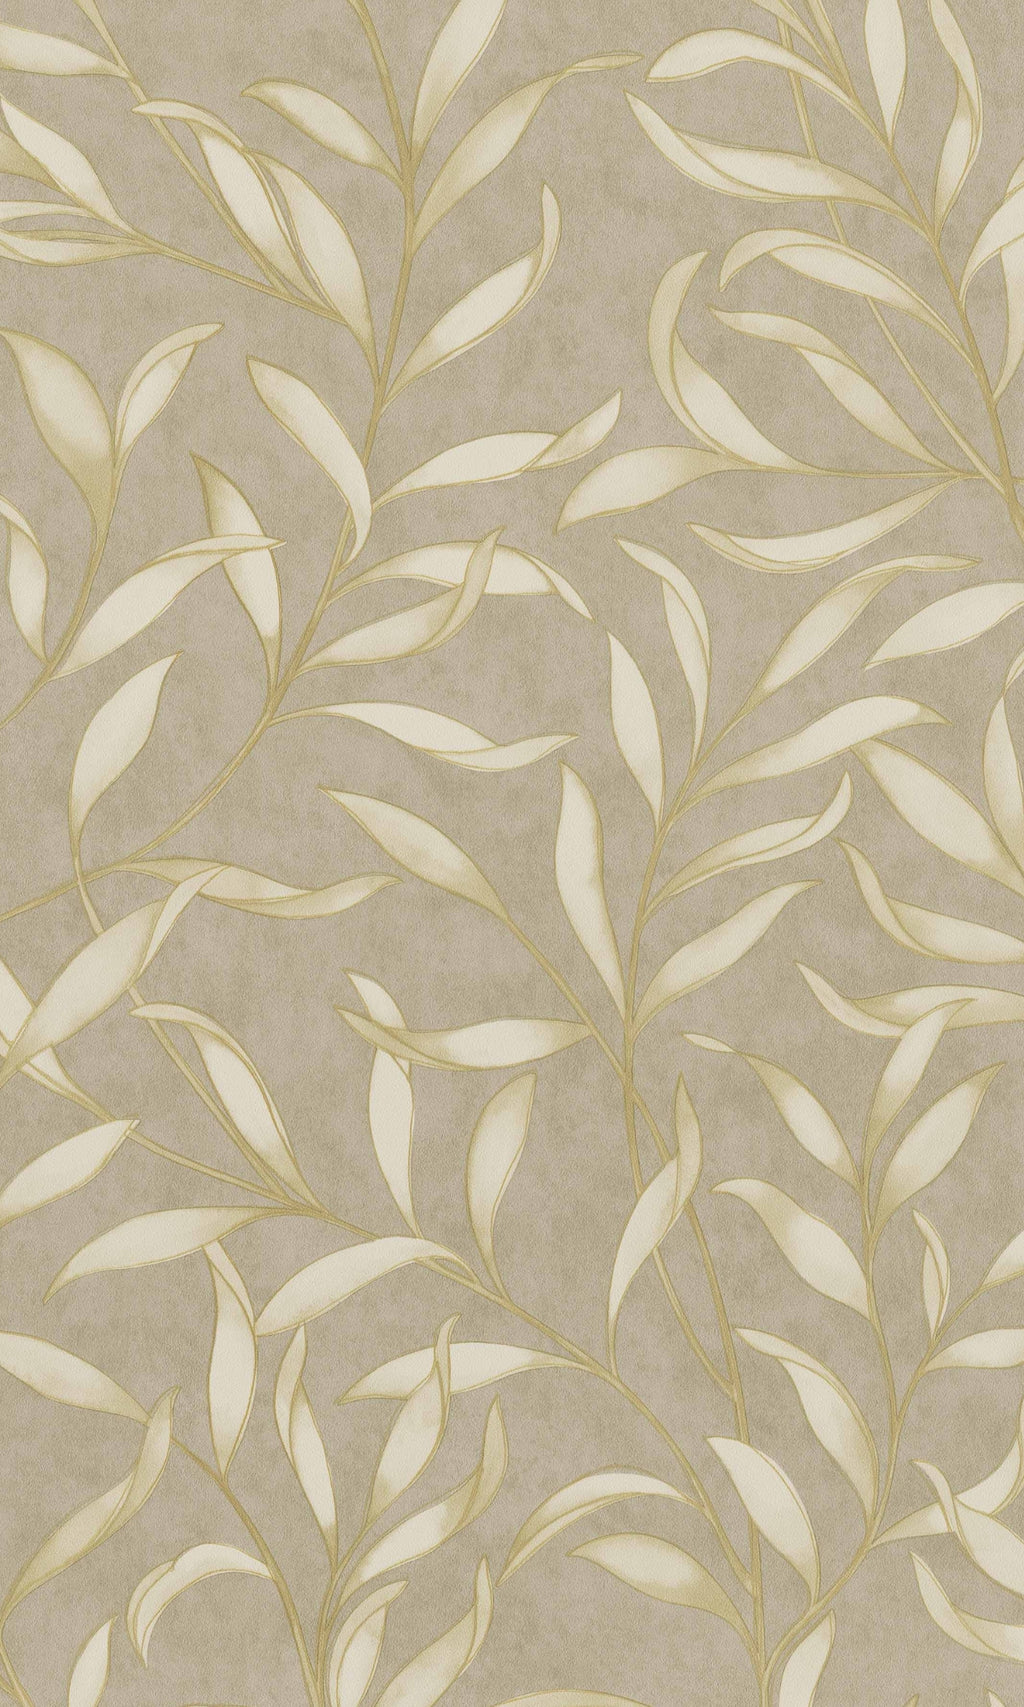 Yellow Twigs Leaves Floral Wallpaper R8567